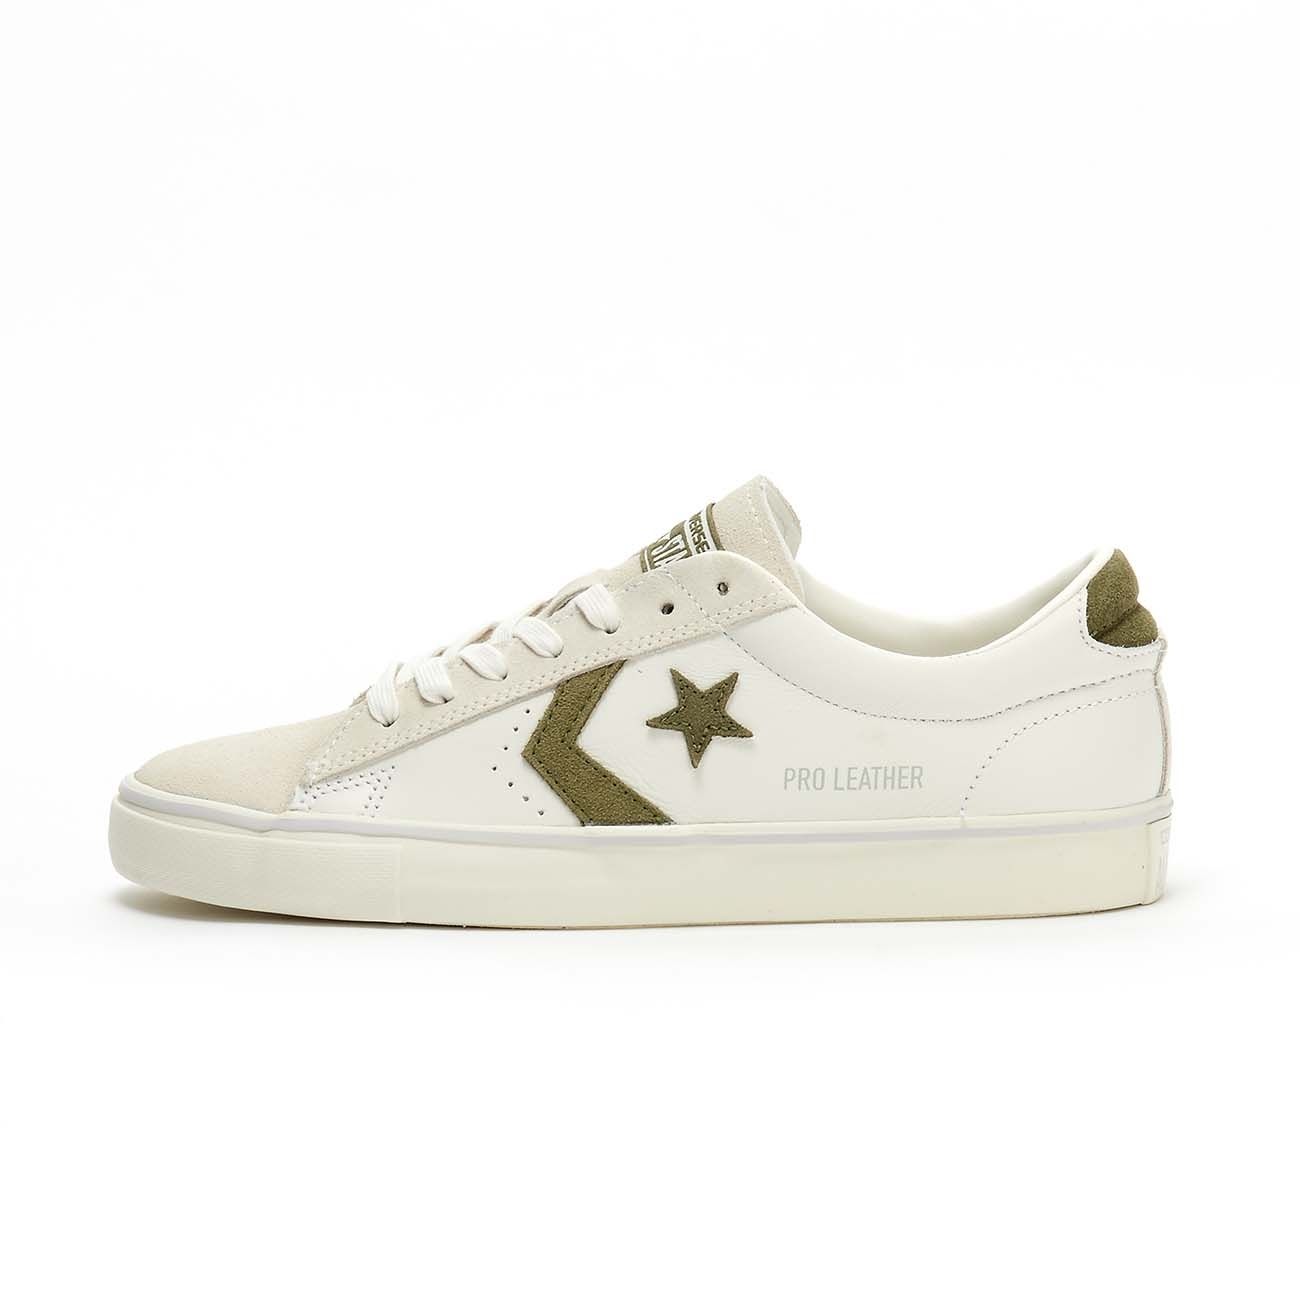 CONVERSE SNEAKERS PRO LEATHER VULC OX Men White medium olive ... عرش قيم اوف ثرونز